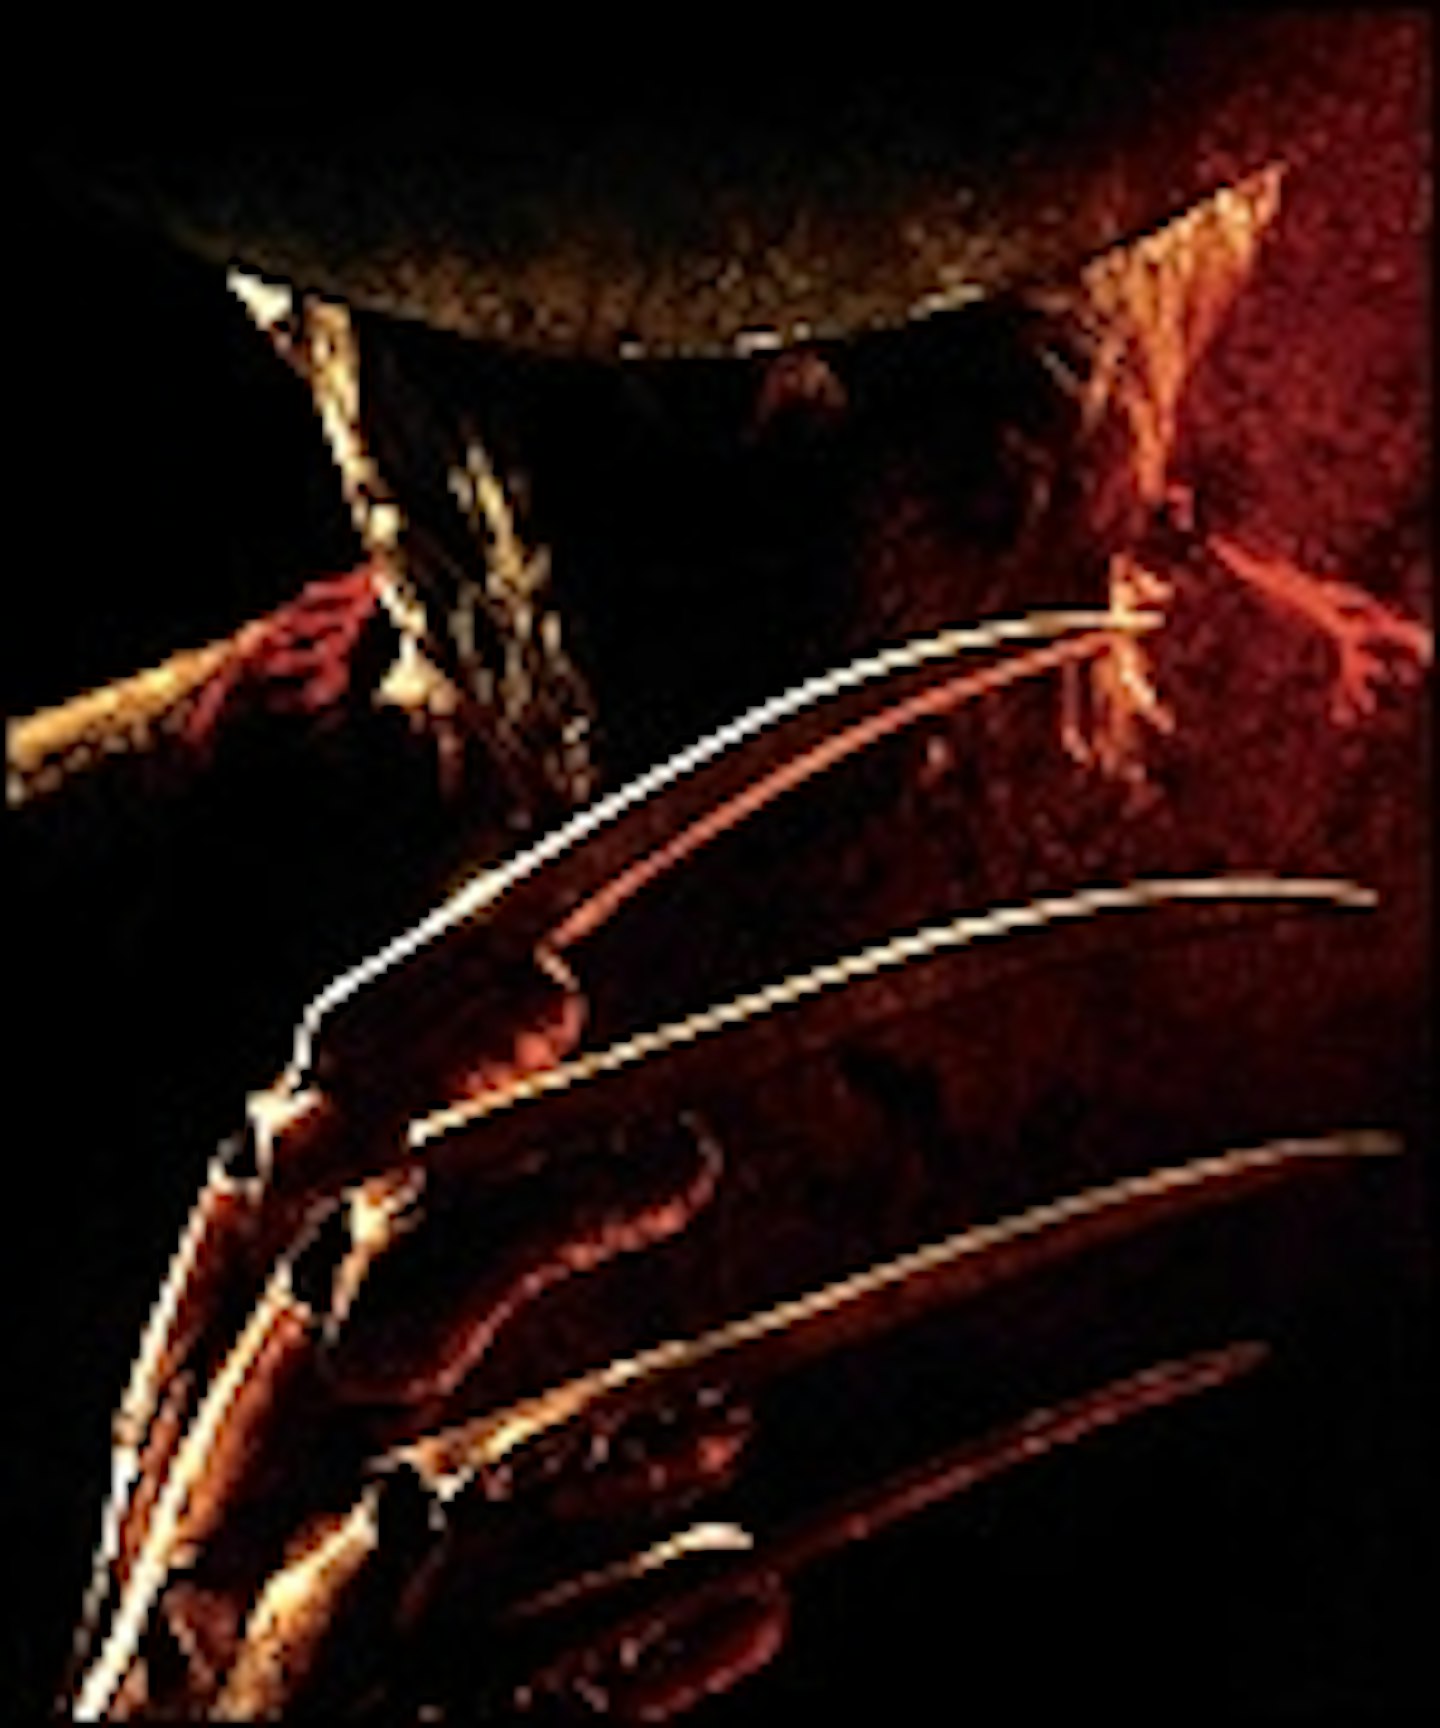 New Art From A Nightmare On Elm Street